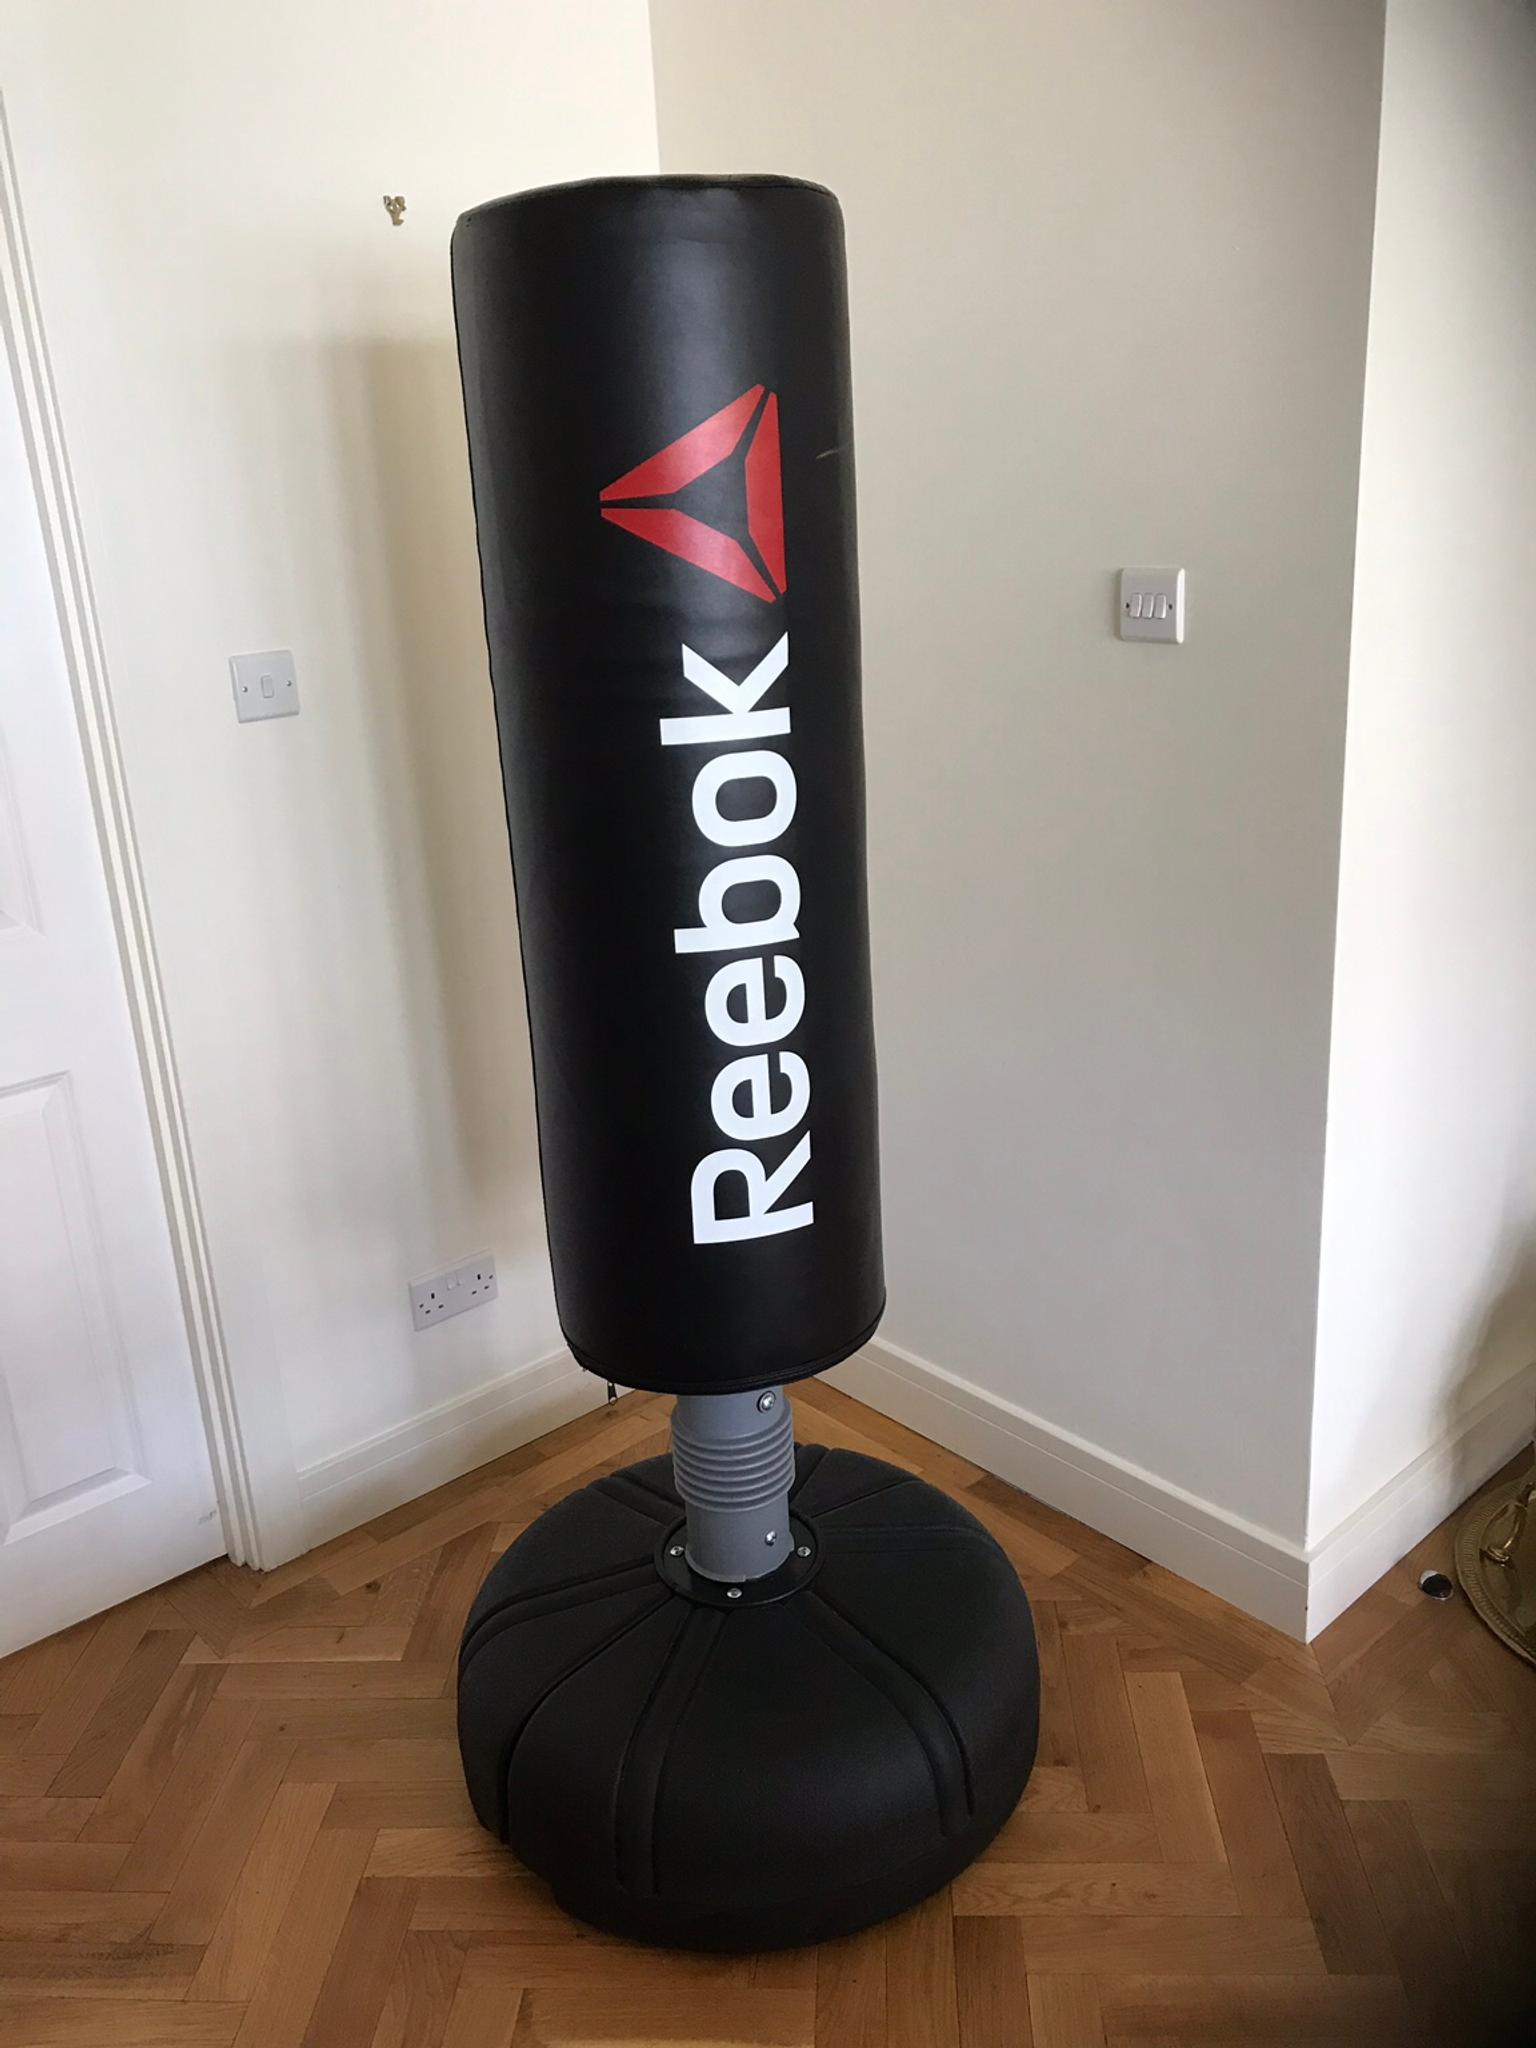 reebok mma tube trainer review